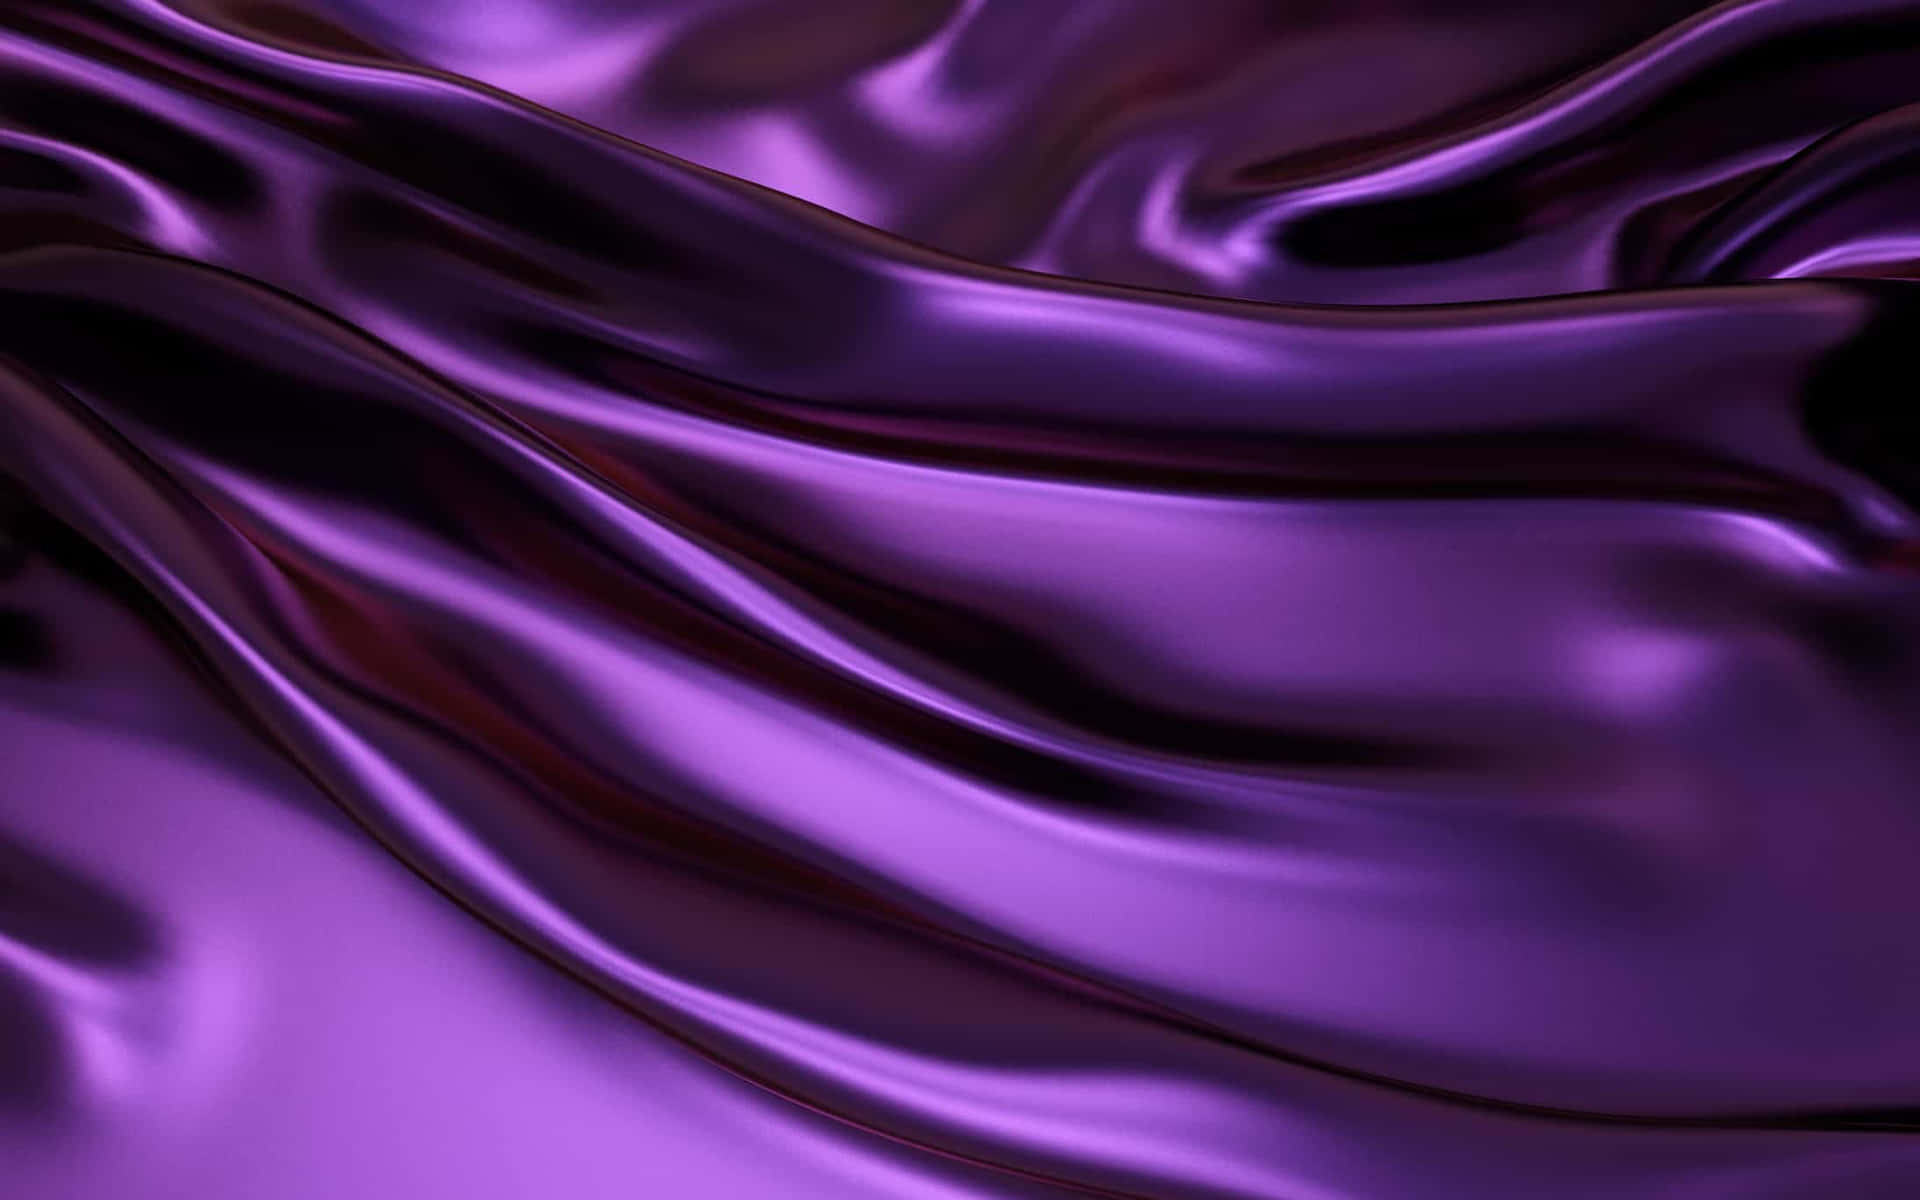 Adorn Your Room with Luxurious Purple Satin Wallpaper